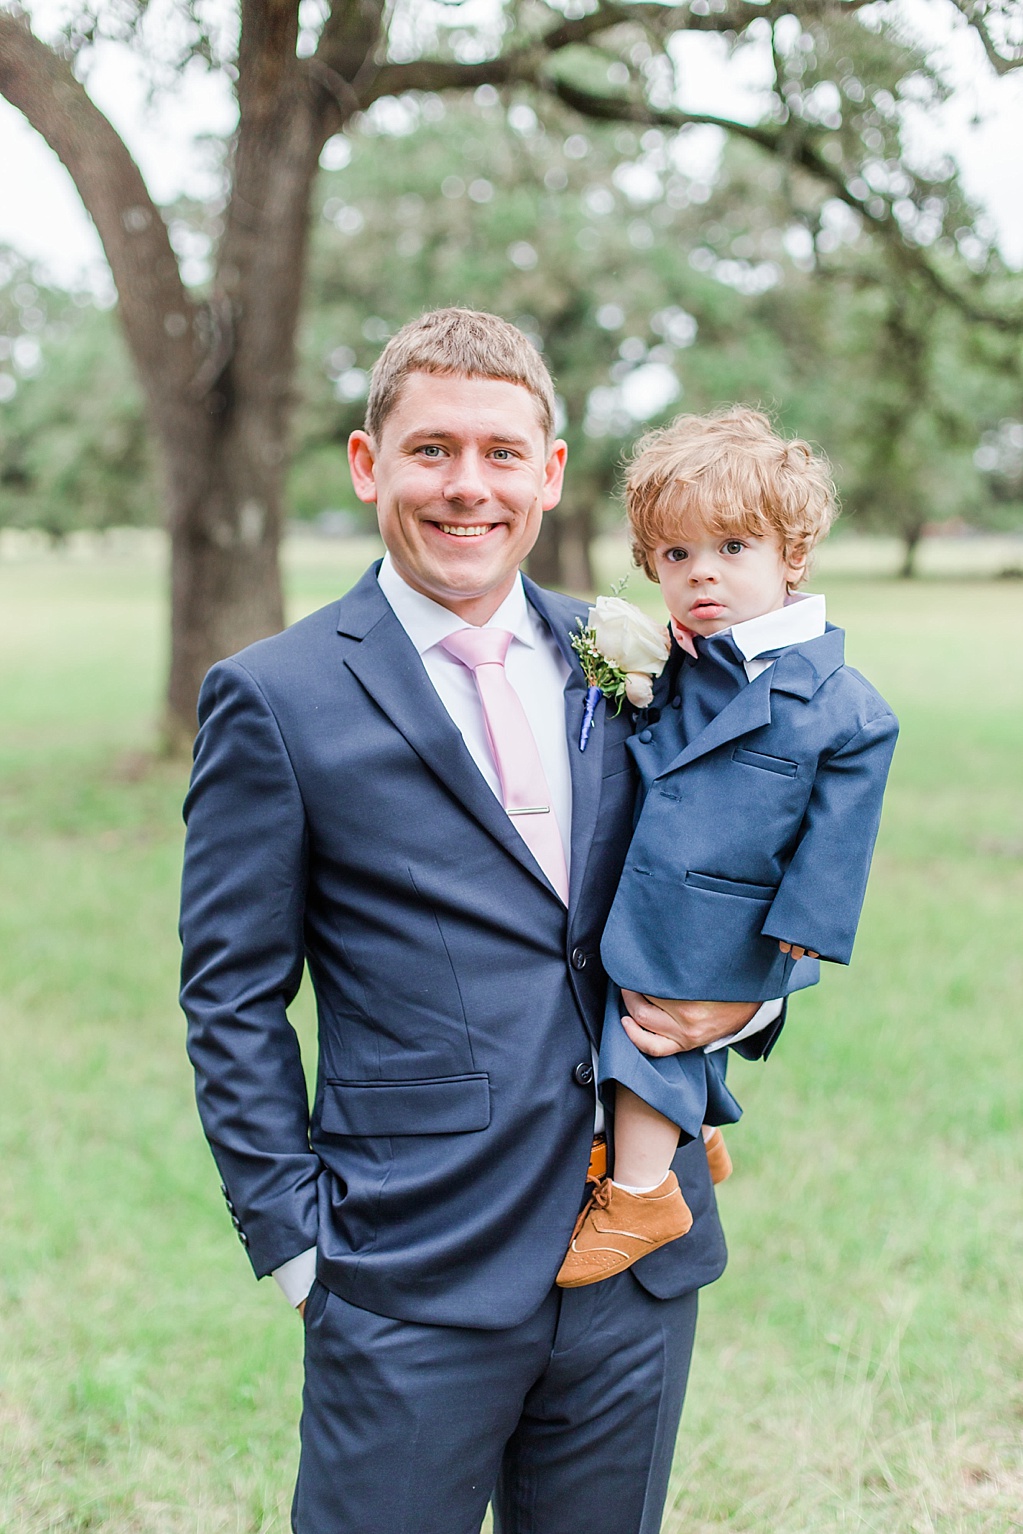 The Oaks at Boerne Wedding Photos by Allison Jeffers Photography 0046